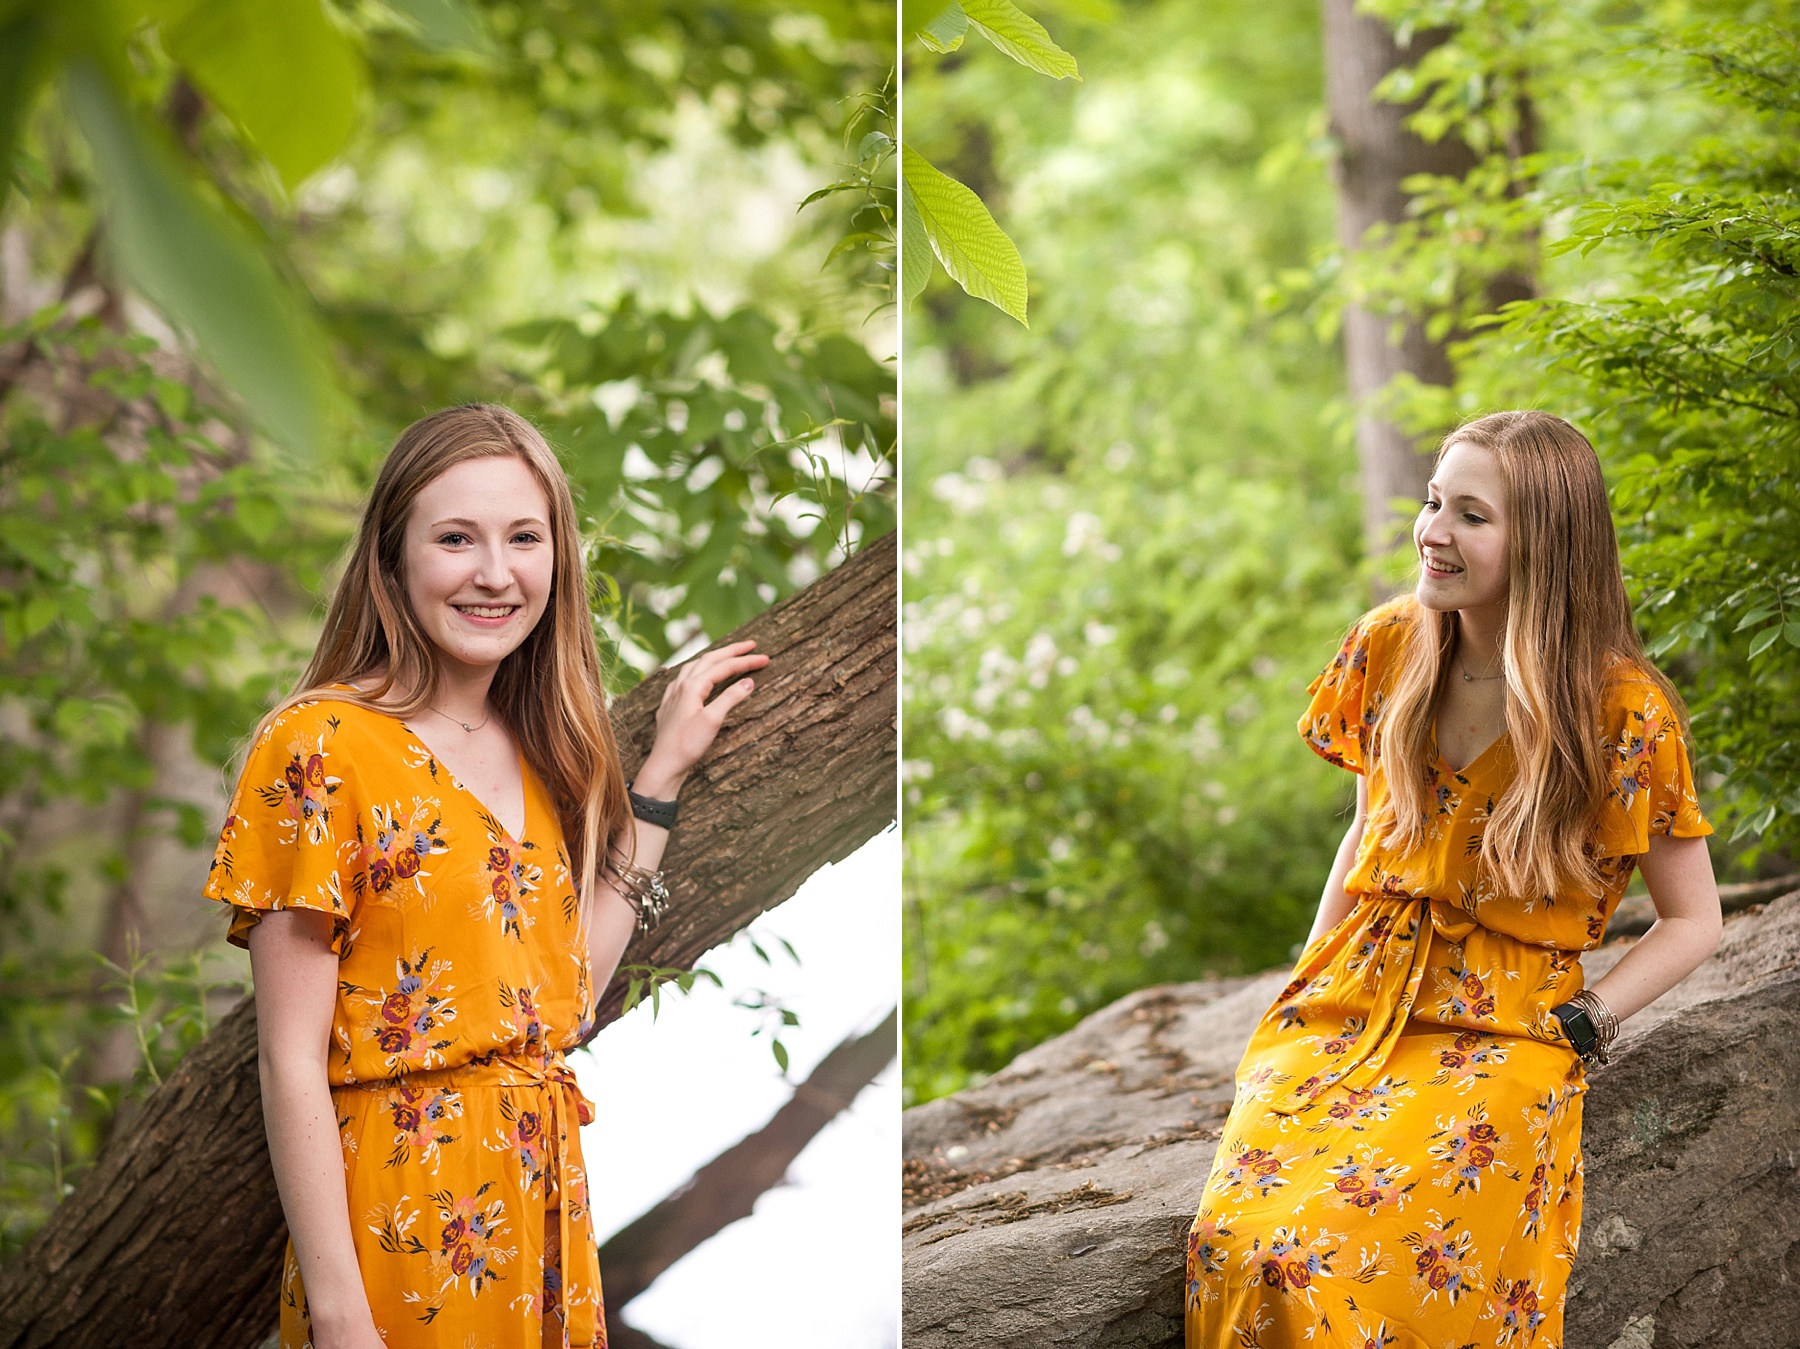 Wendy Zook Photography | Frederick MD senior portrait photographer, Frederick senior portraits, Maryland senior portrait photographer, MD senior portraits, senior portraits, senior photos with pets, MD senior photographer, senior session, Frederick senior session